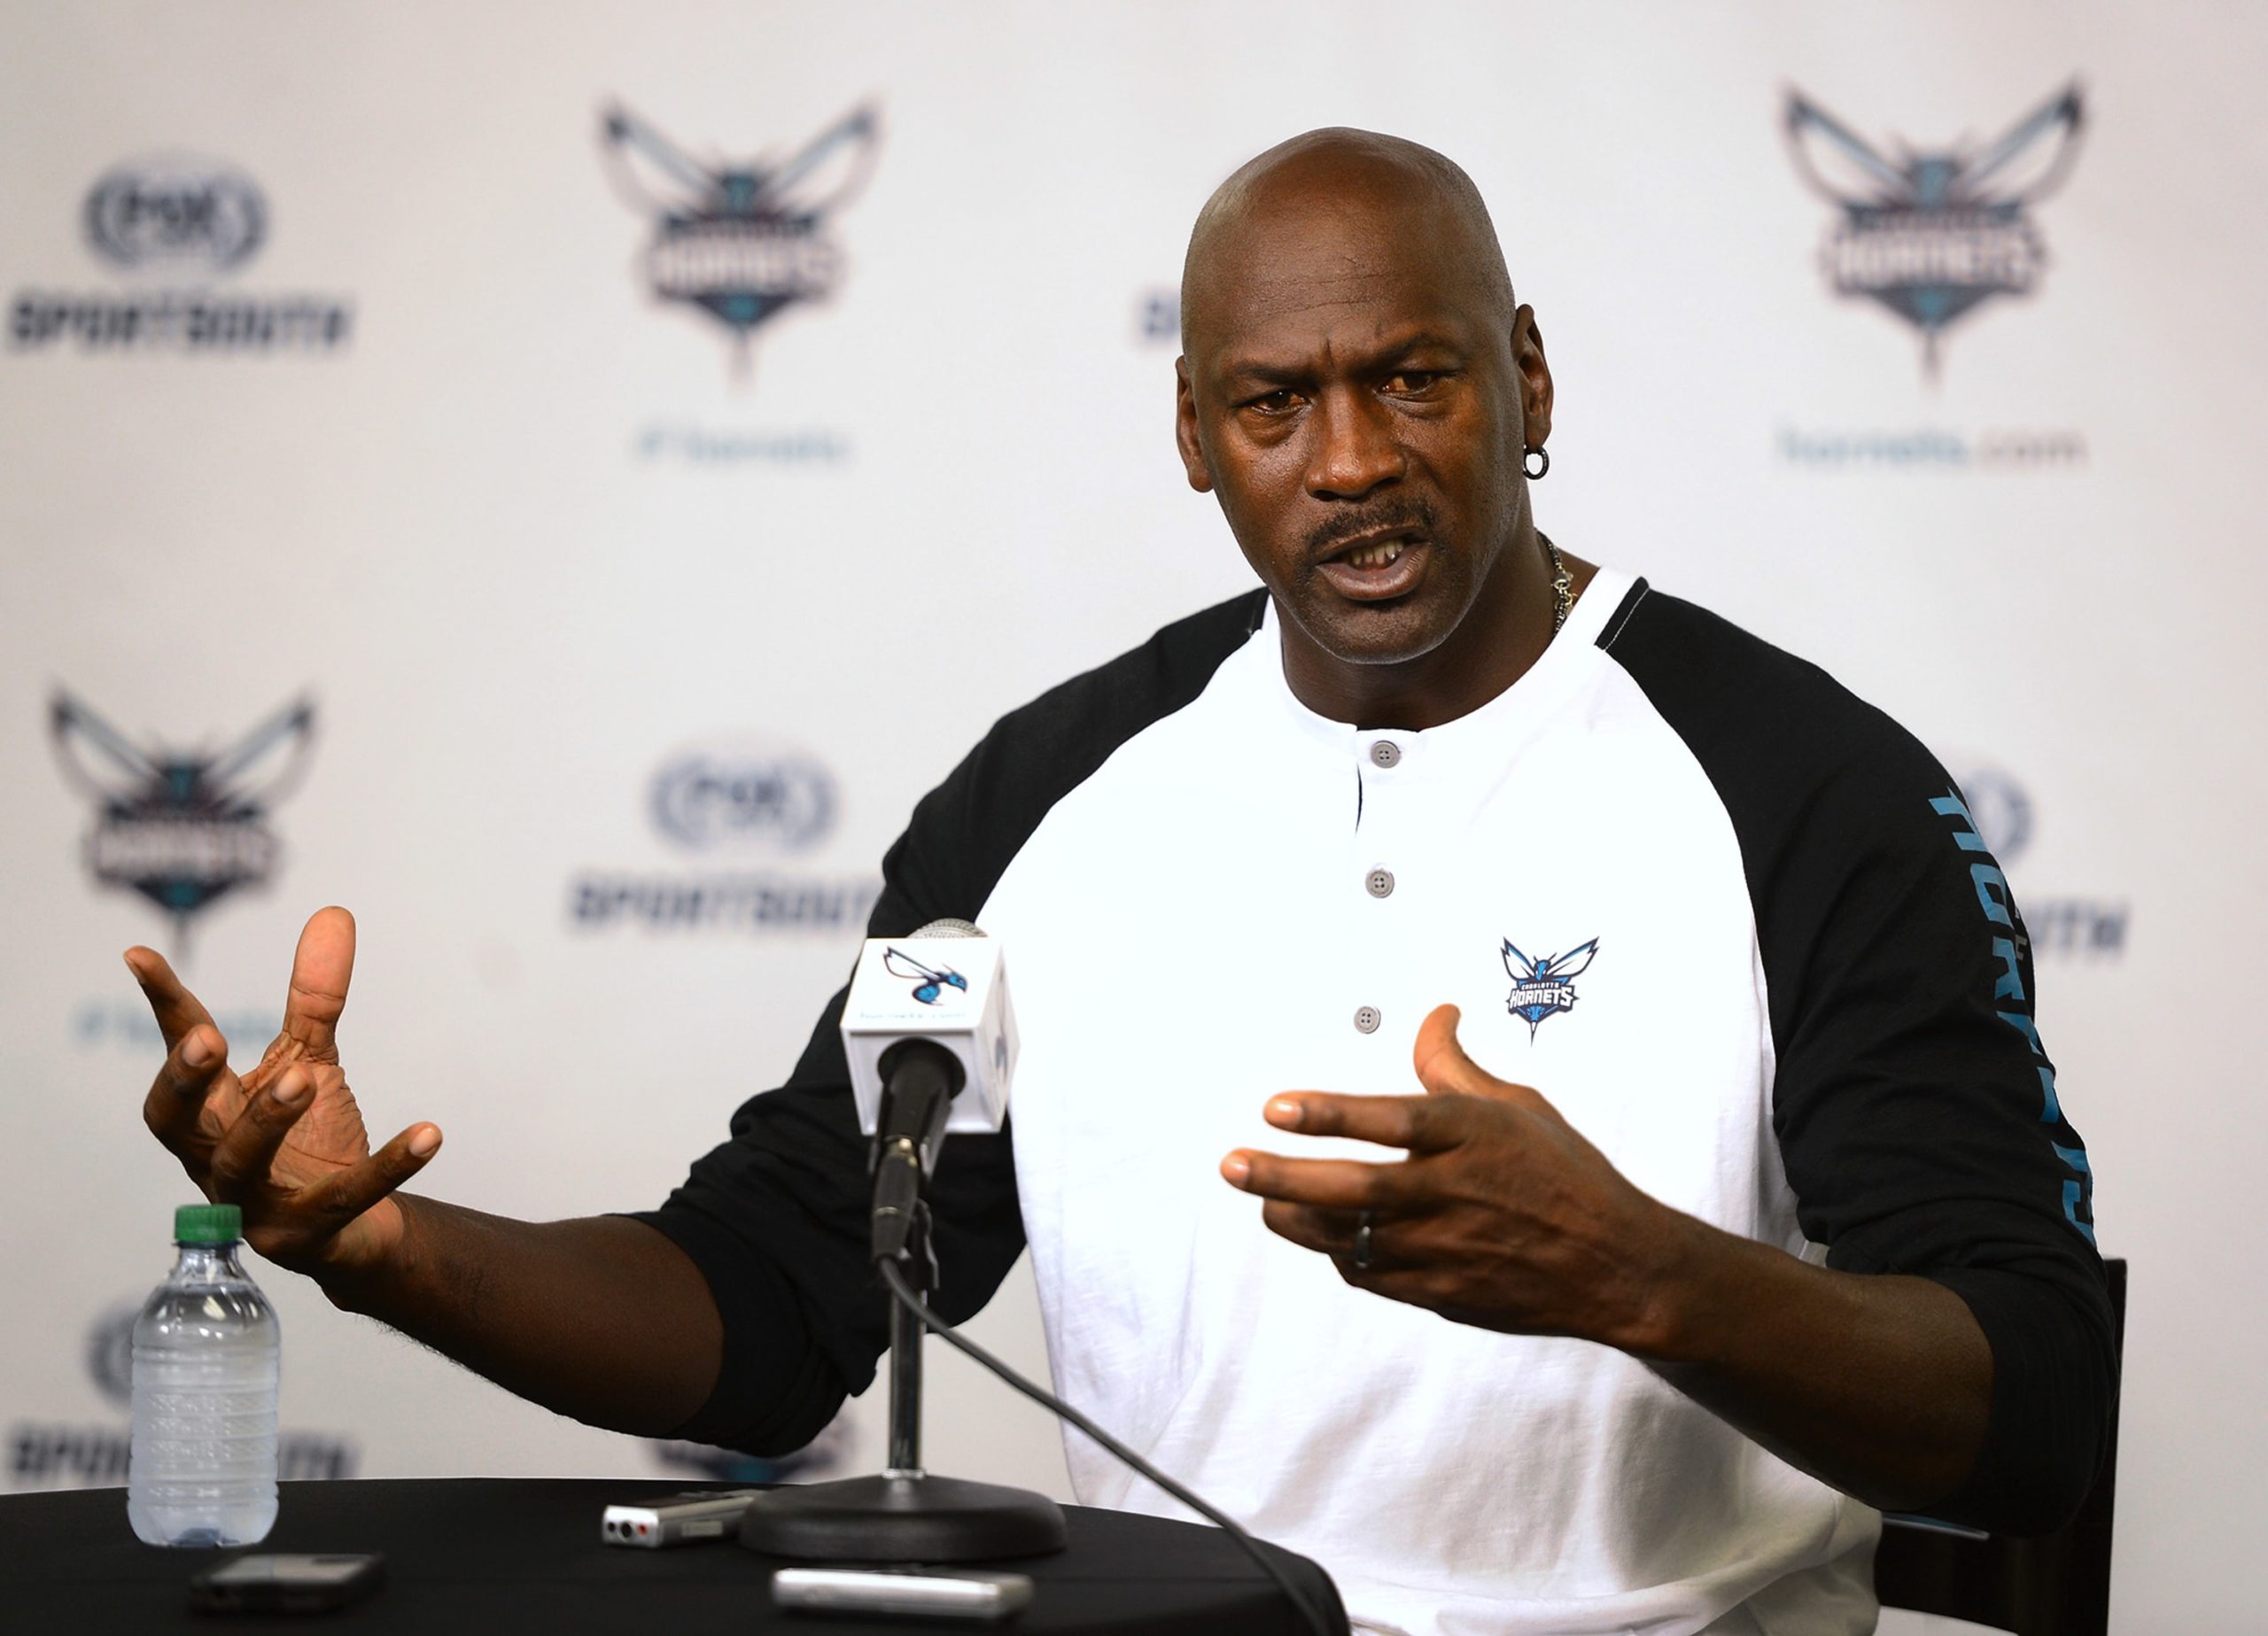 DraftKings inventory surges 13% after Michael Jordan joins as board advisor